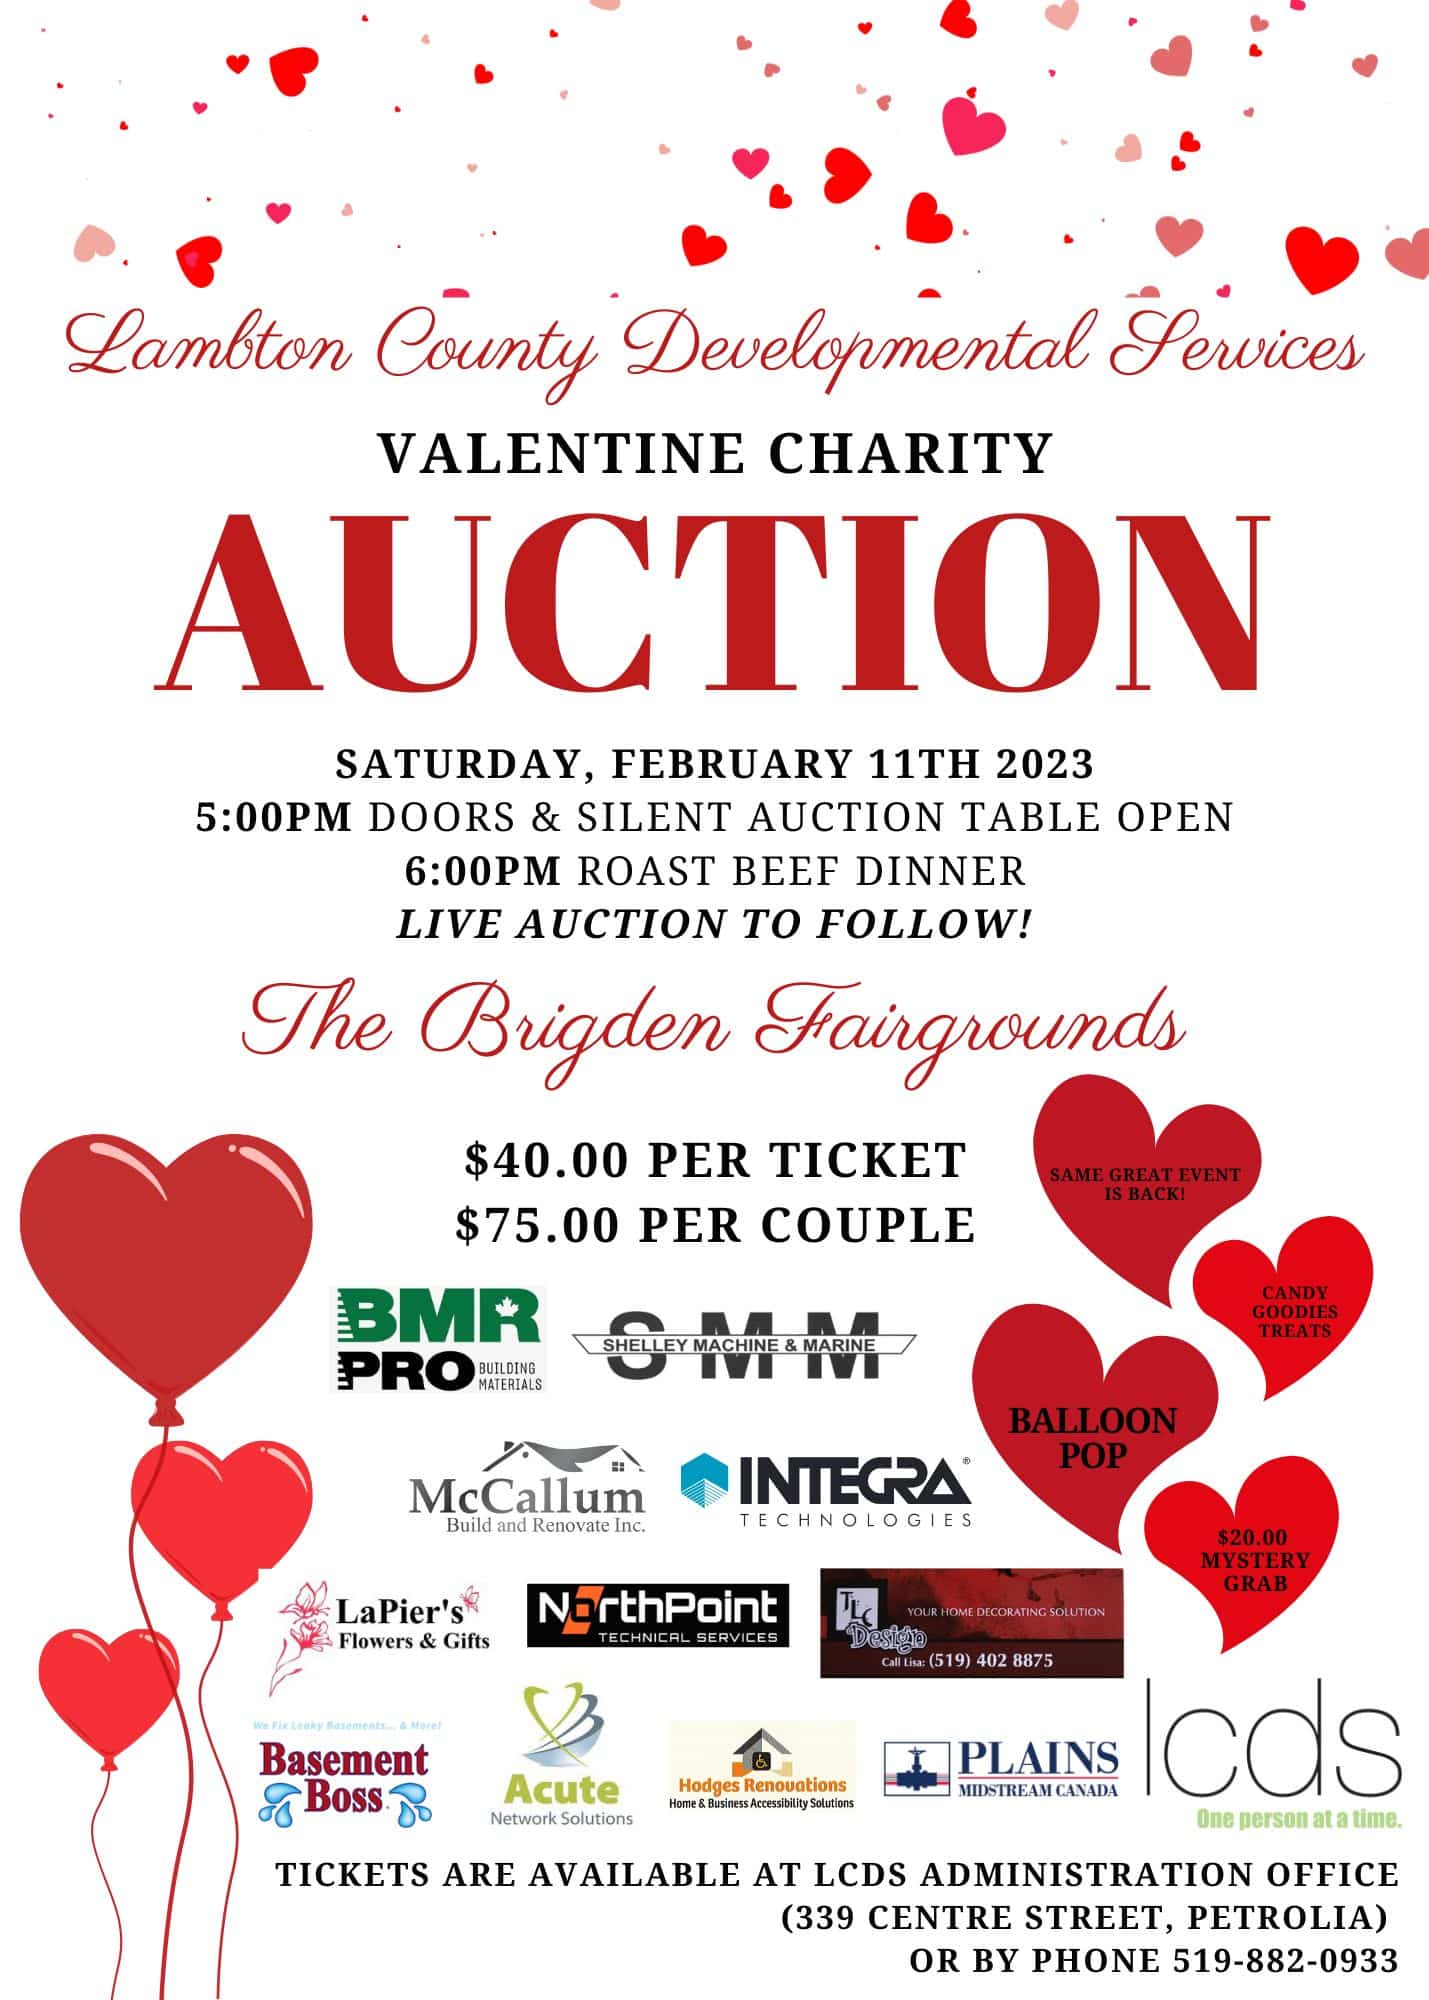 2023 LCDS Valentine Charity Auction